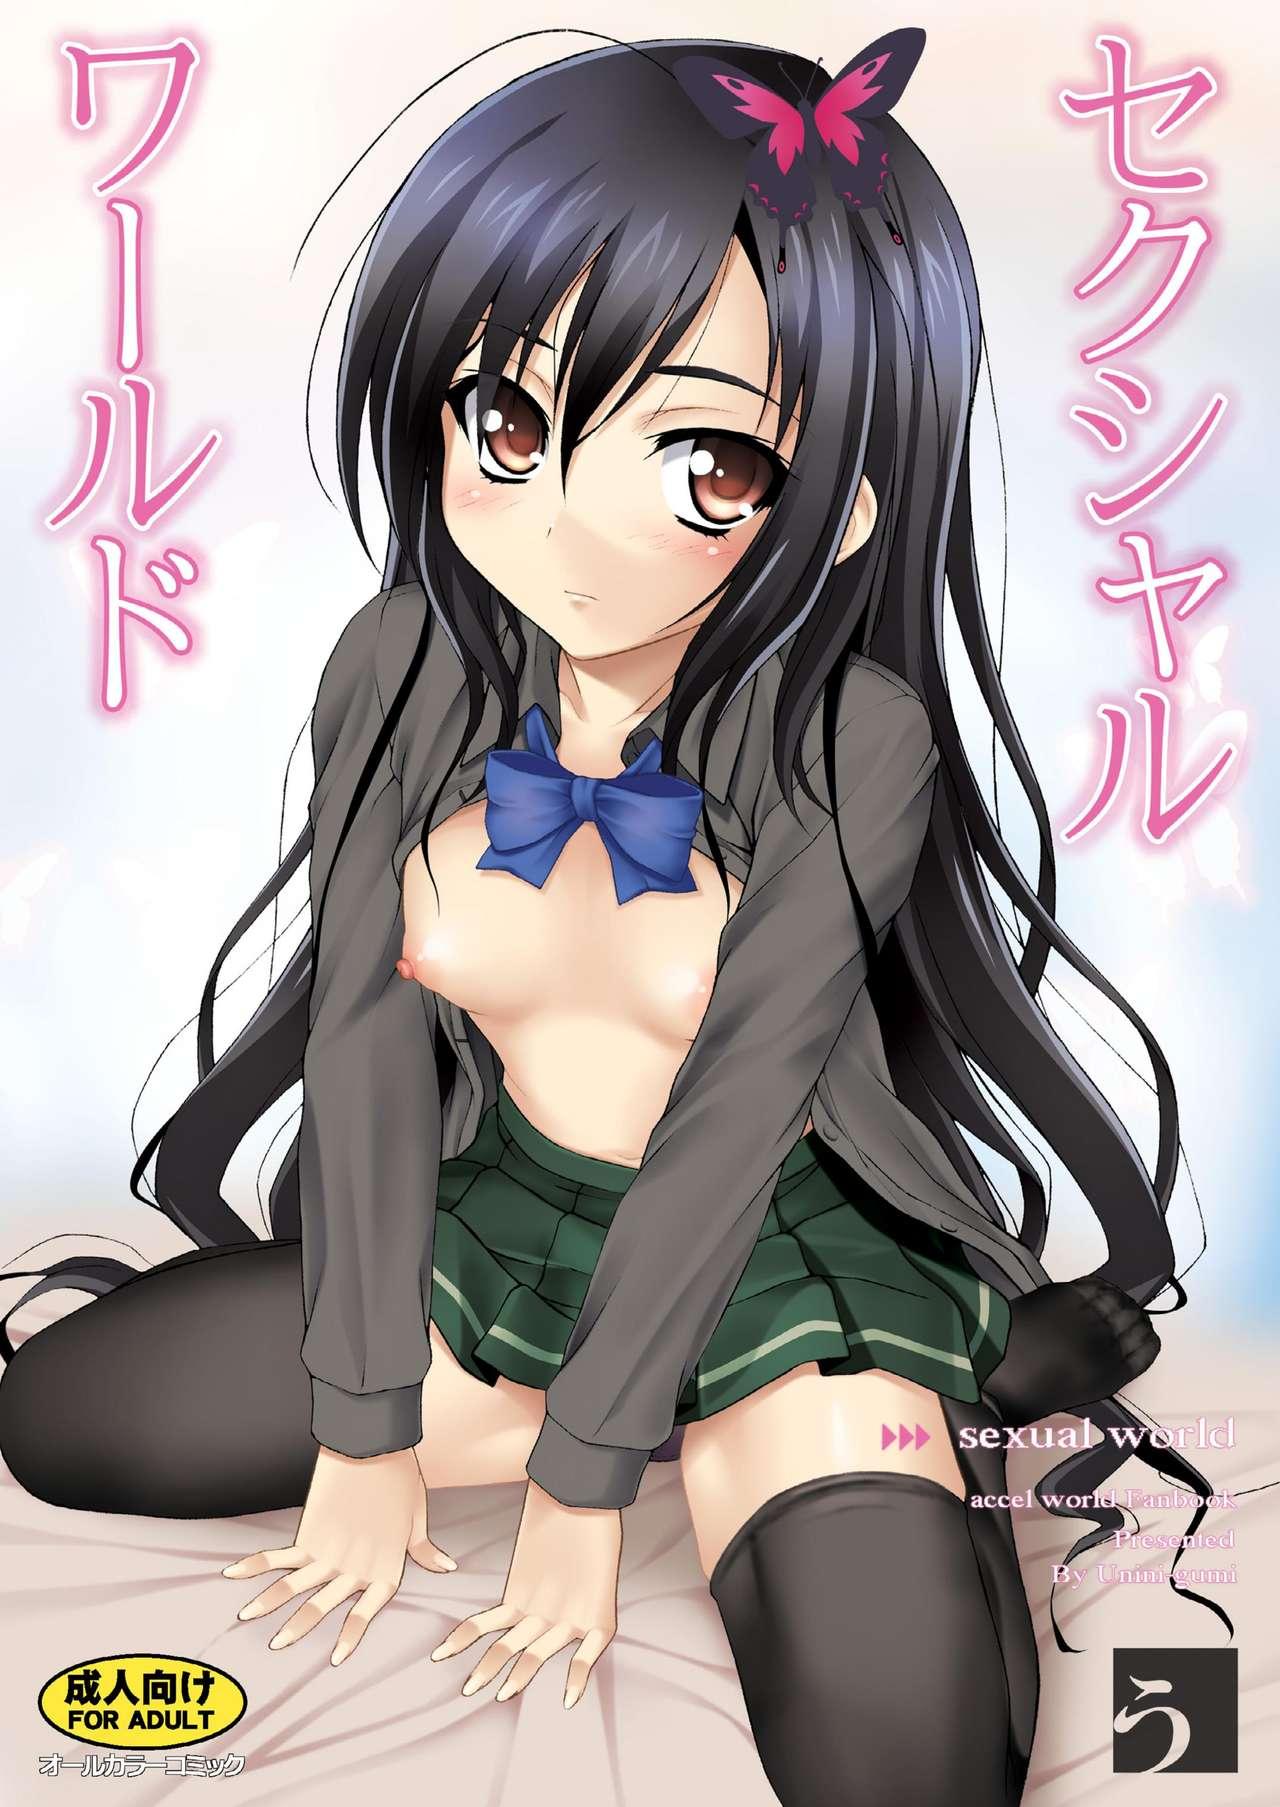 Mistress Sexual world - Accel world Petite Teen - Page 1